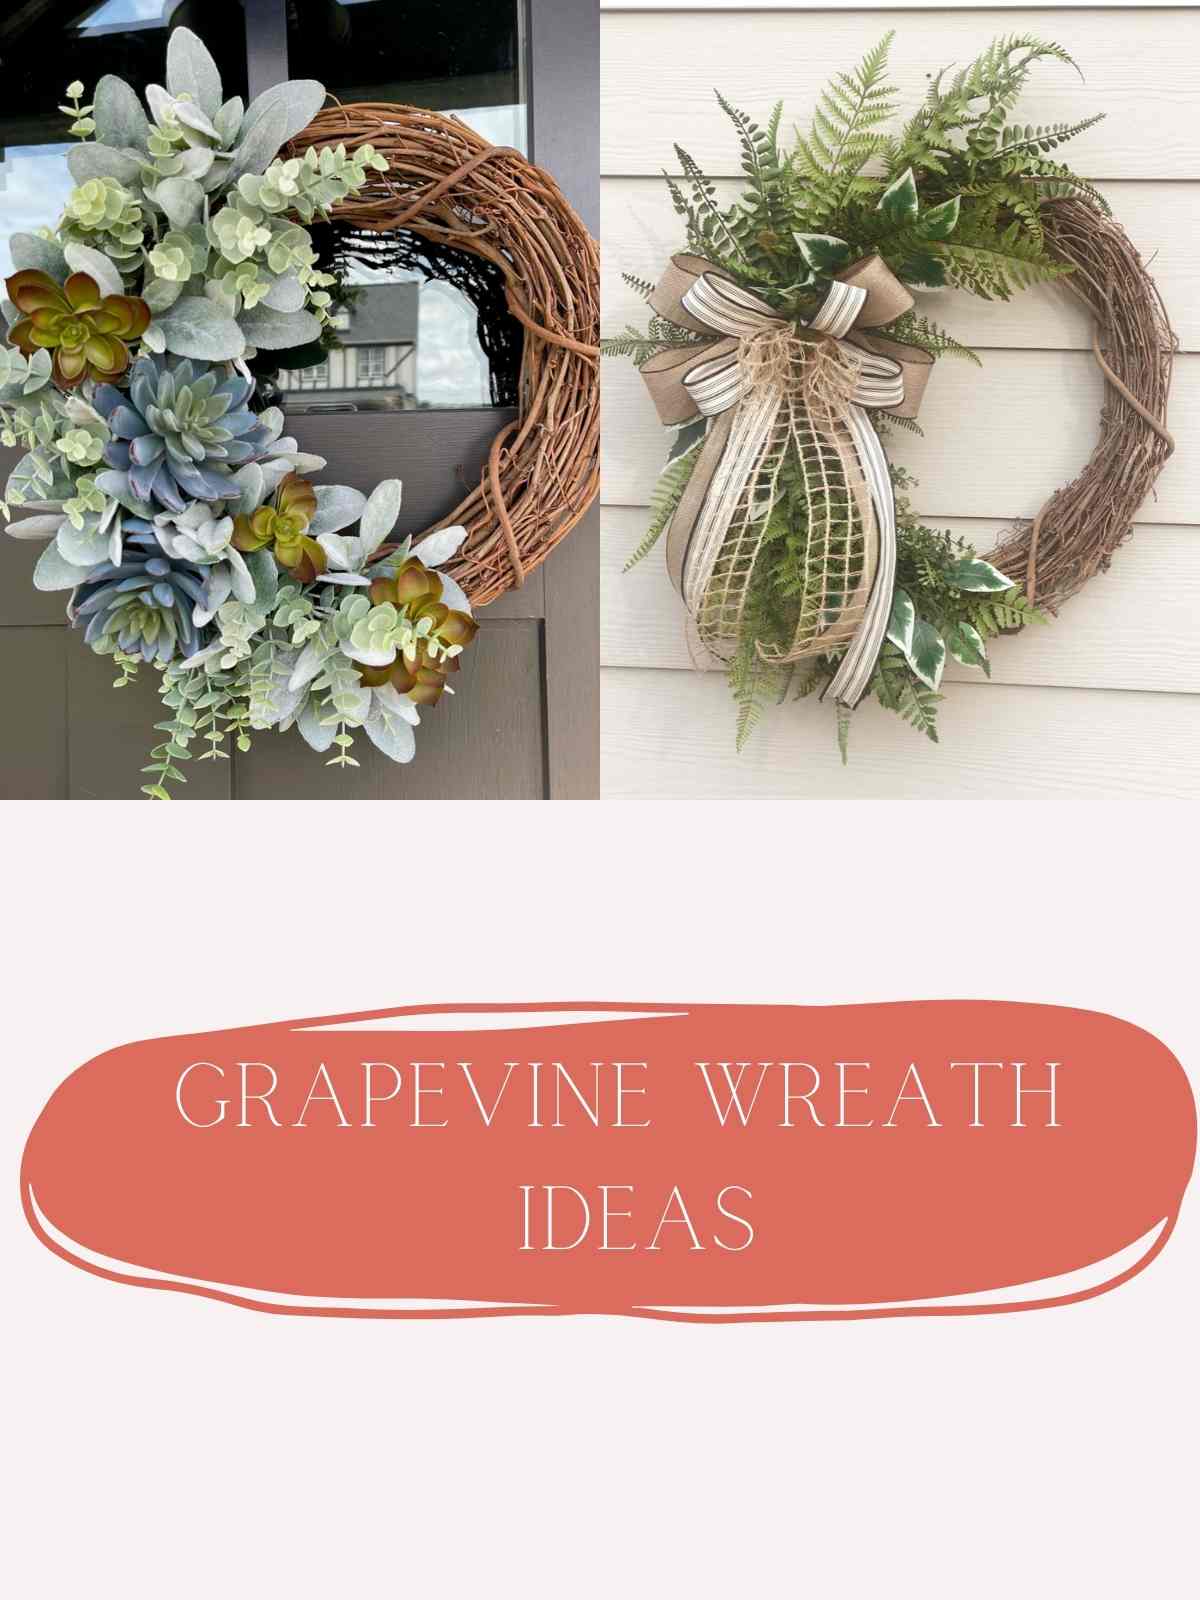 Spring wreath ideas with succulents and ferns